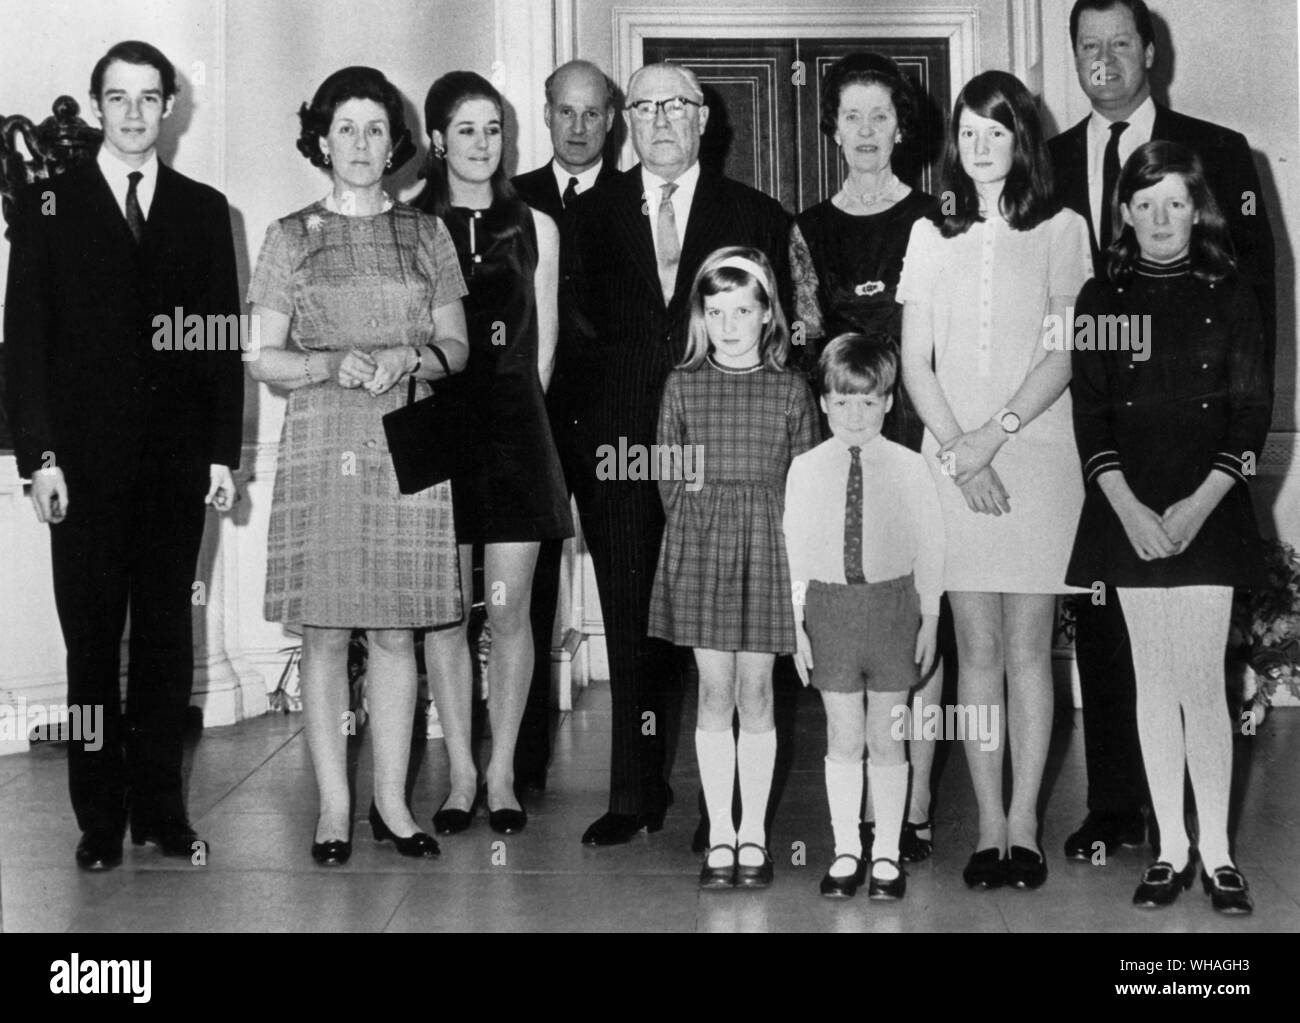 Golden Wedding anniversary in 1969 of the 7th Earl and Countess Spencer. Front left, Lady Diana Stock Photo